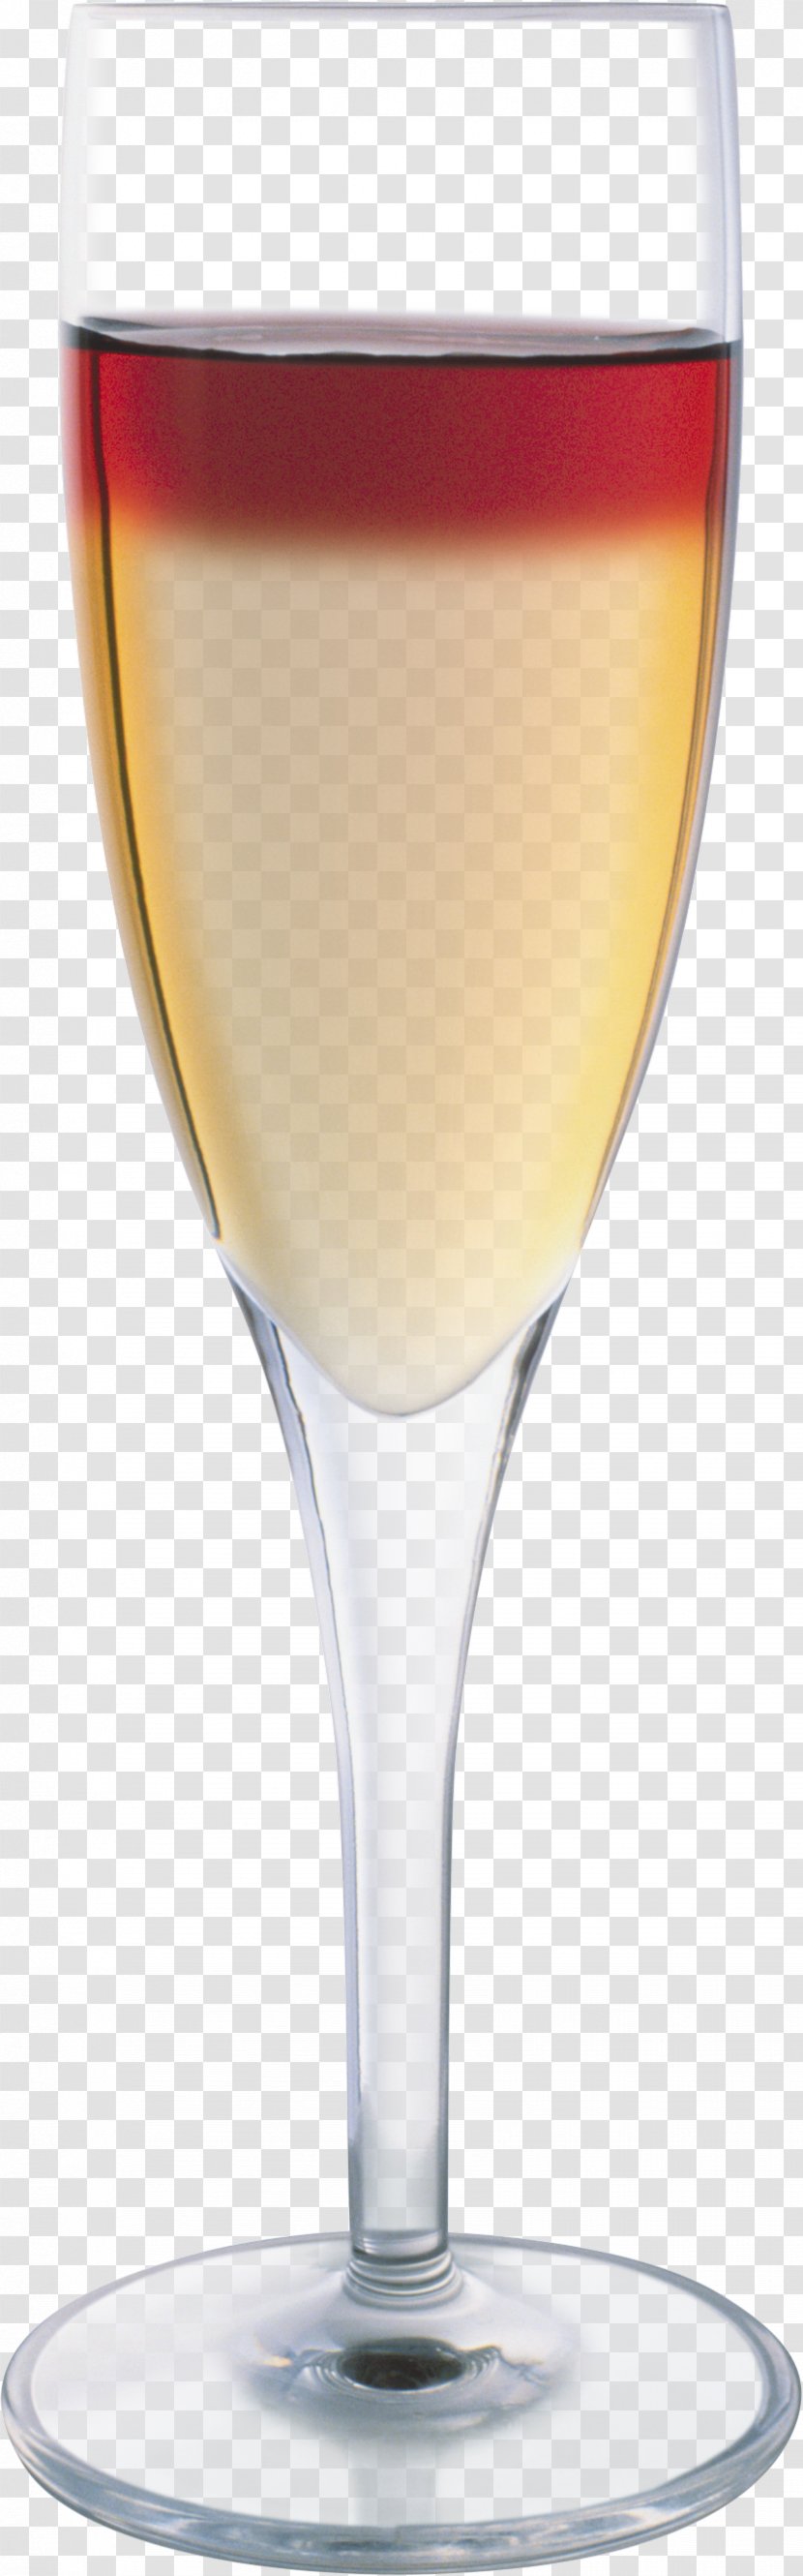 Wine Glass Cocktail White Transparent PNG